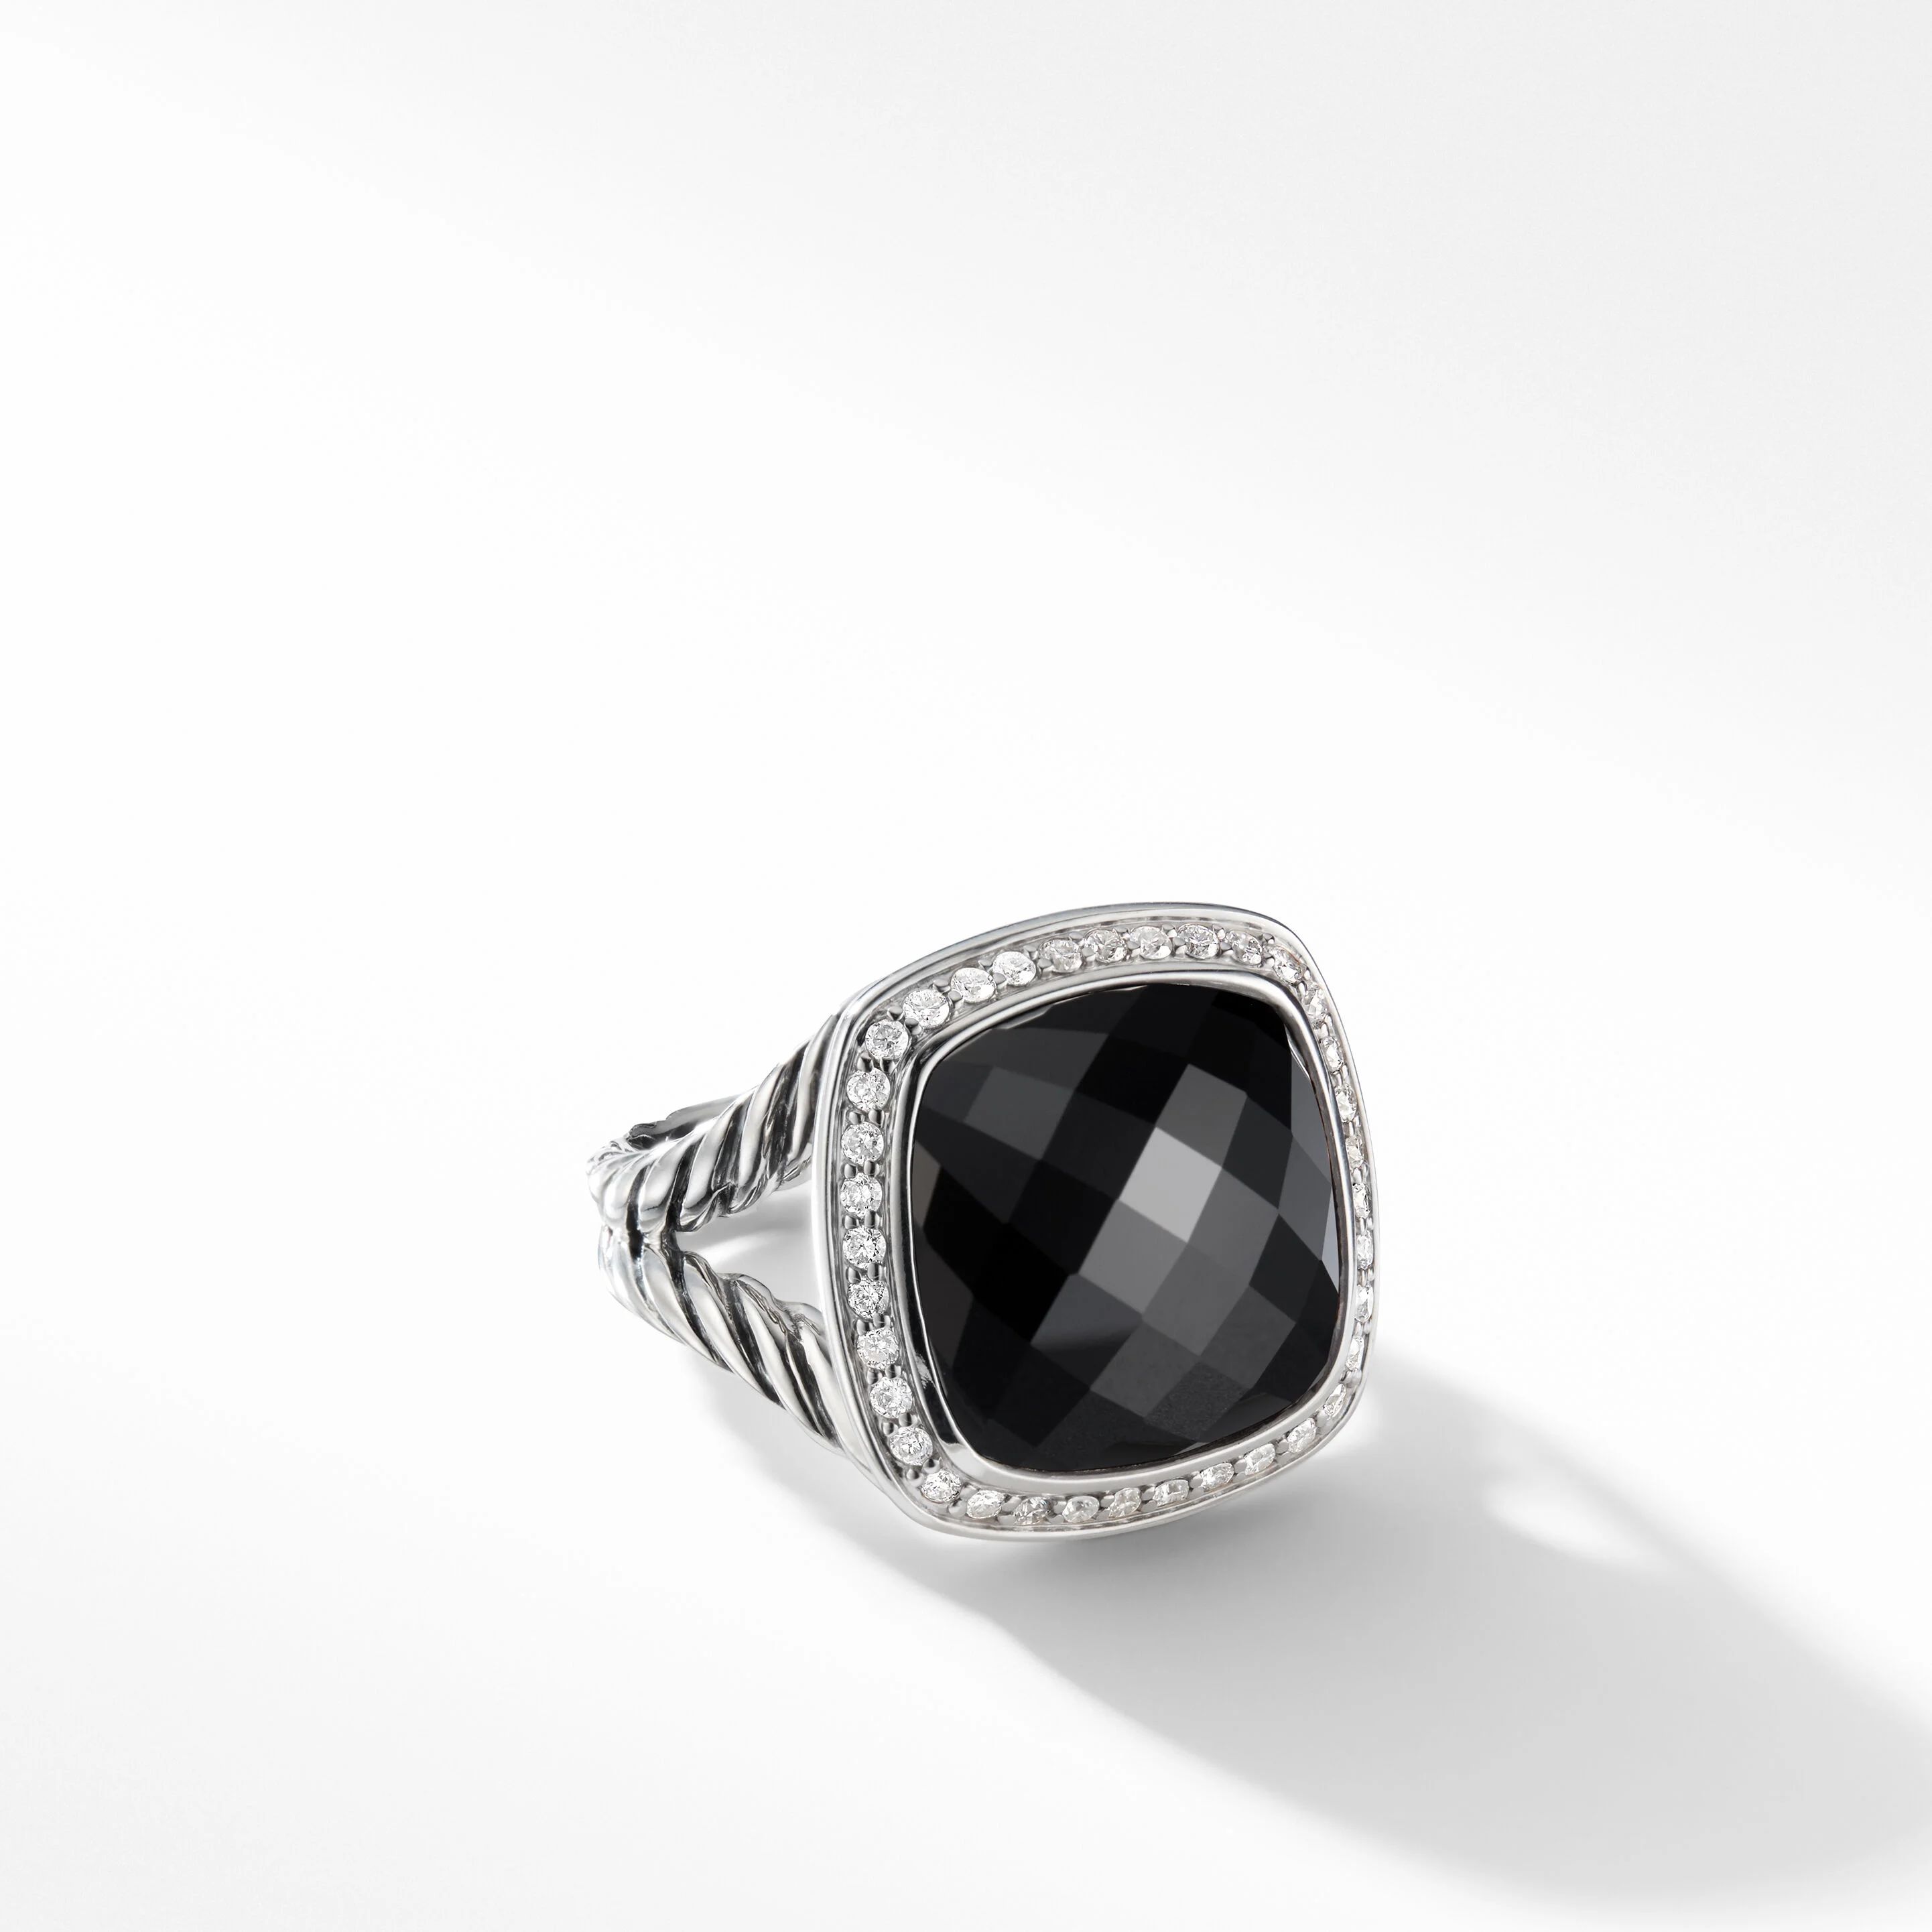 Albion® Ring in Sterling Silver with Black Onyx and Pavé Diamonds | David Yurman